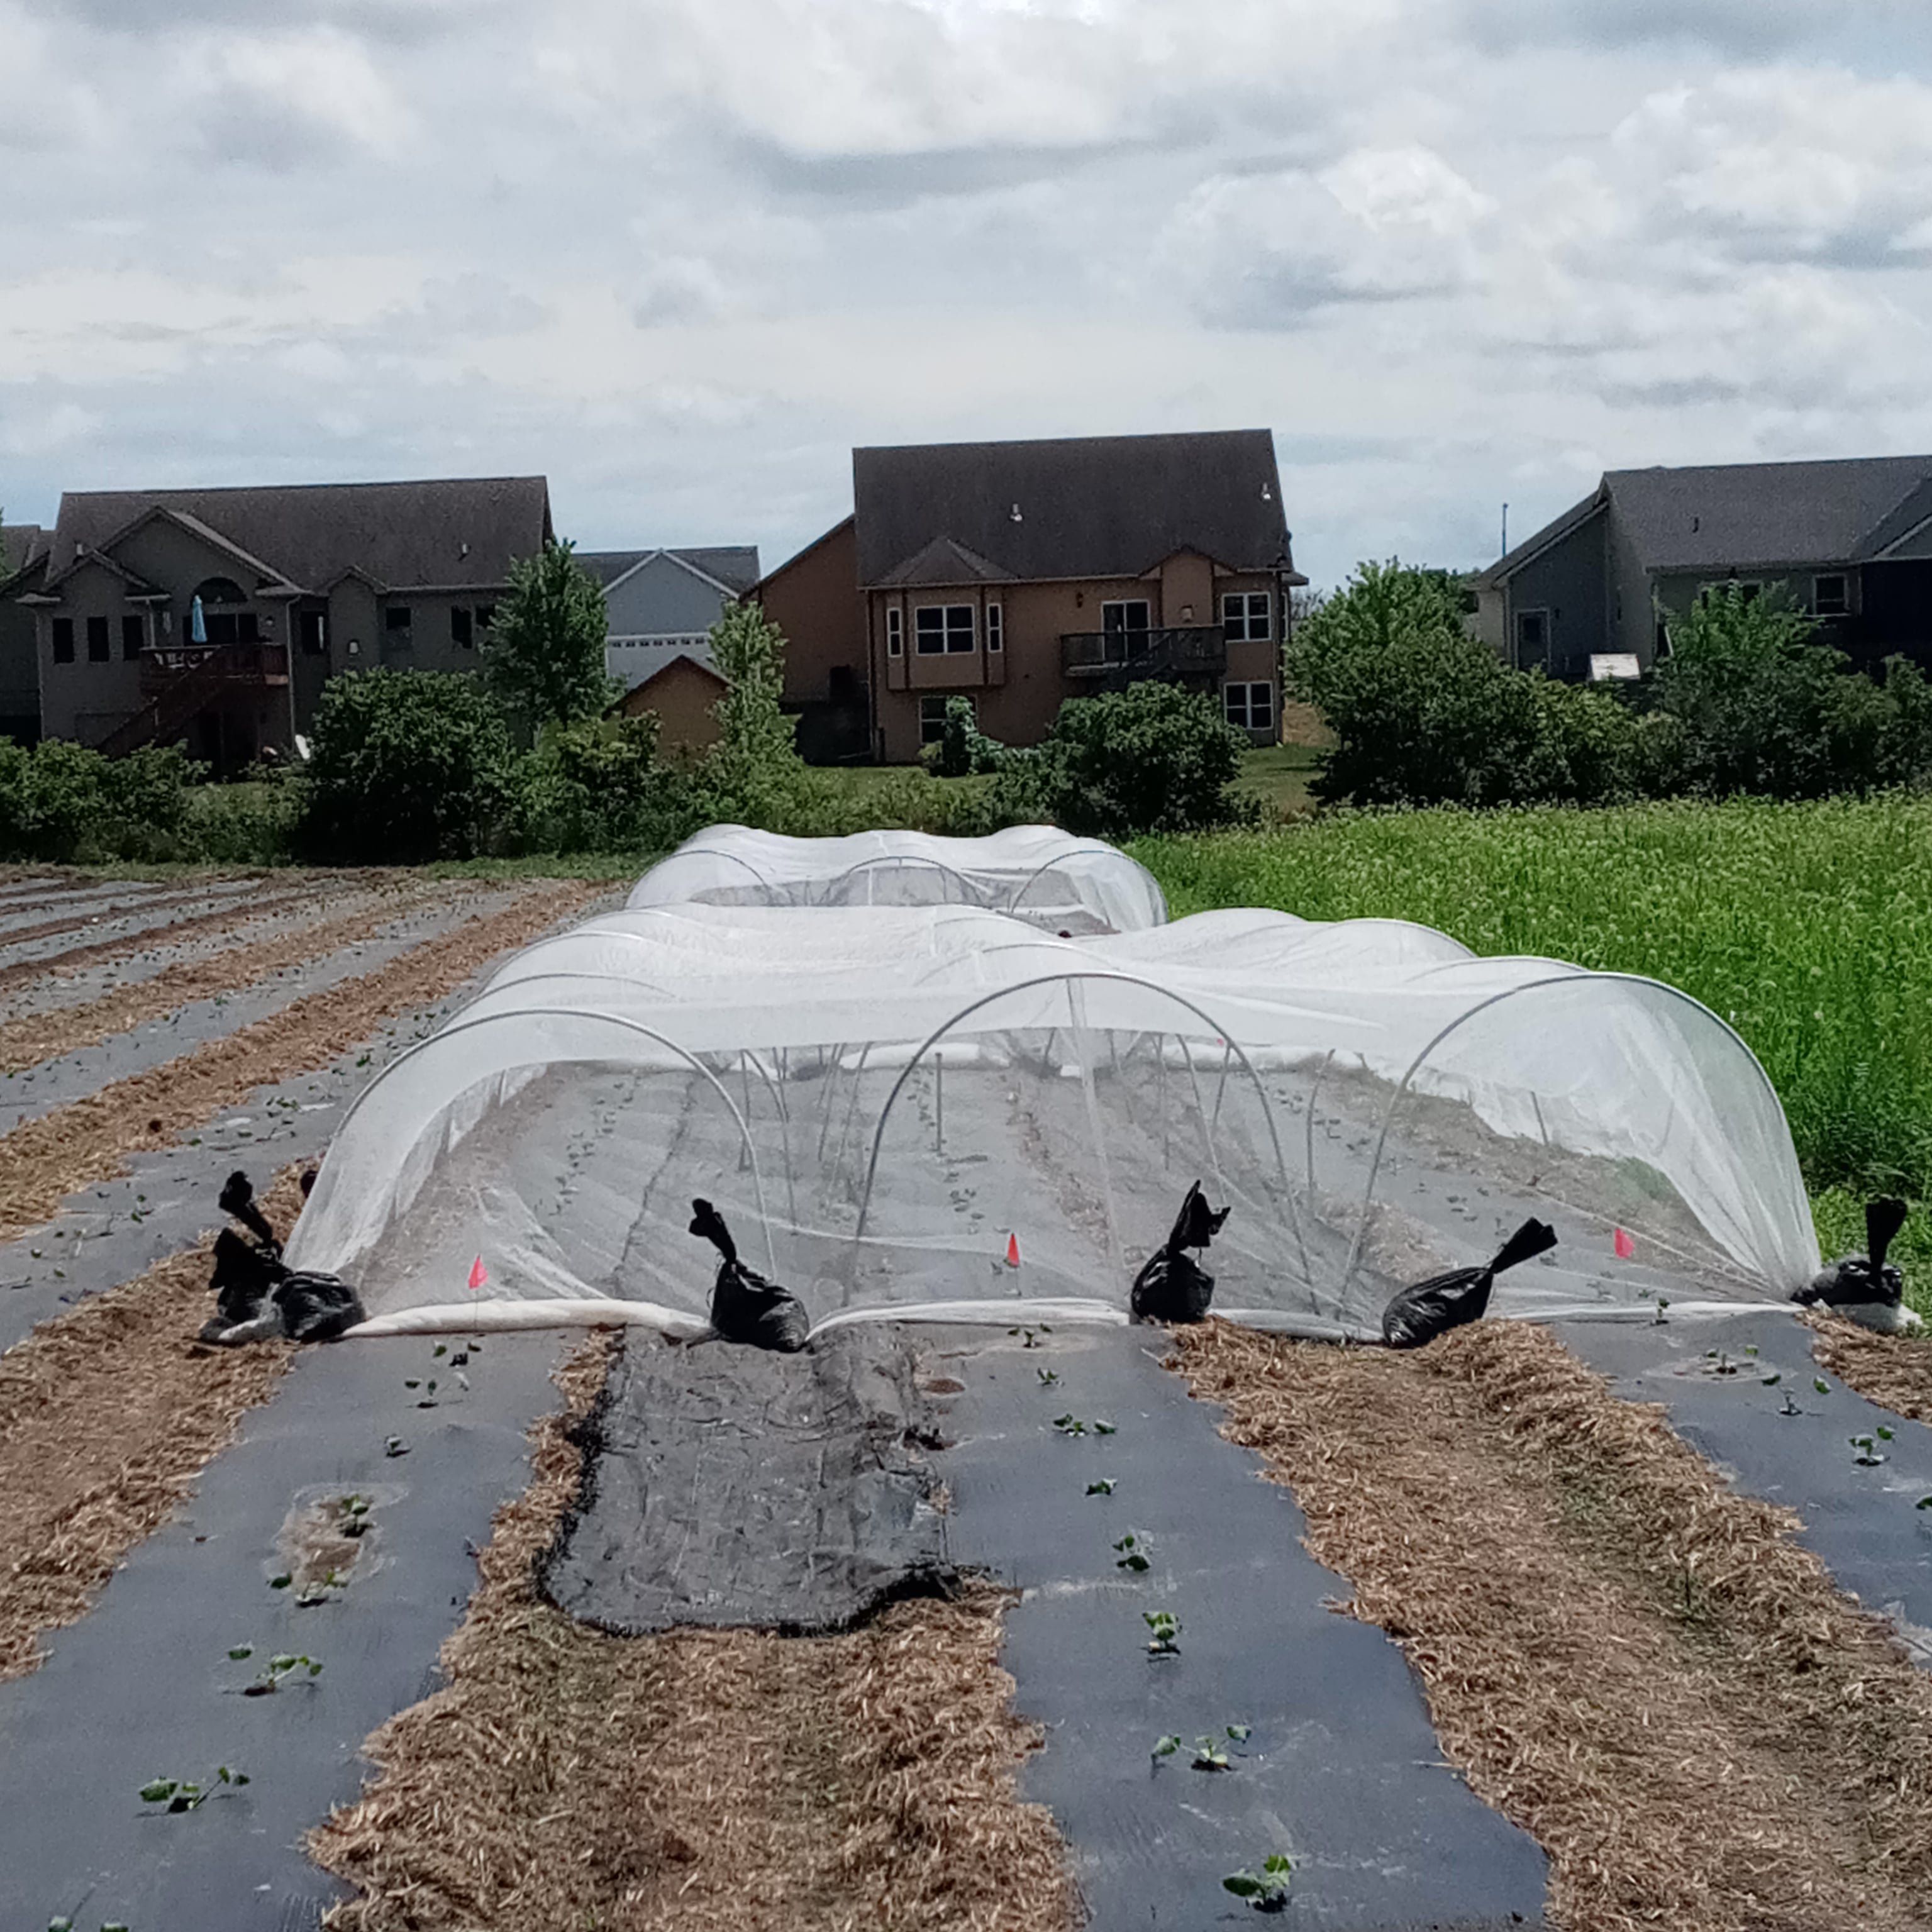 Next Happening: Farm Happenings for July 22, 2020